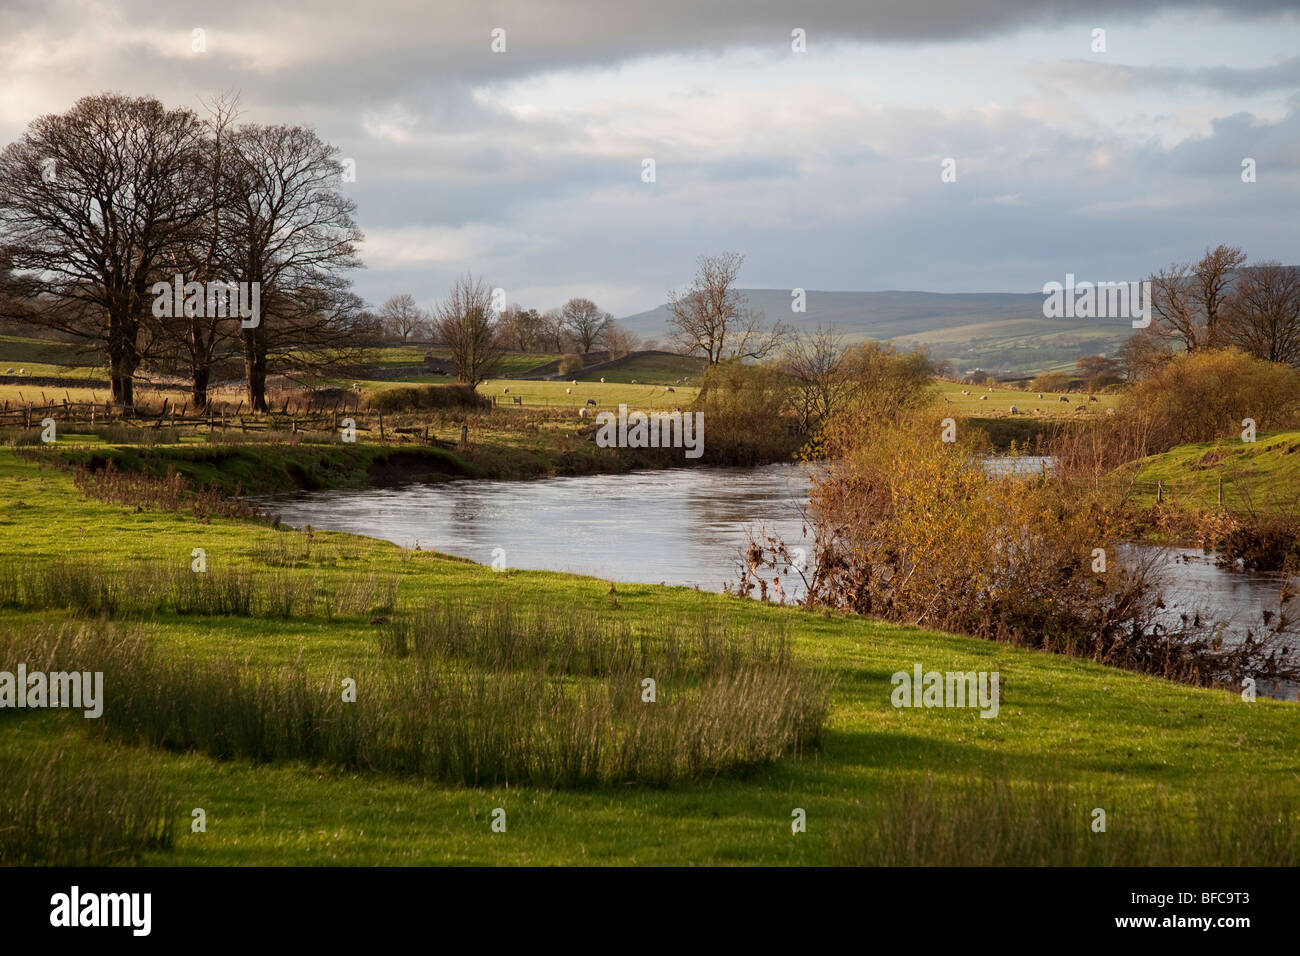 Golden evening light by the River Ure, near Aysgarth, Wensleydale Stock Photo